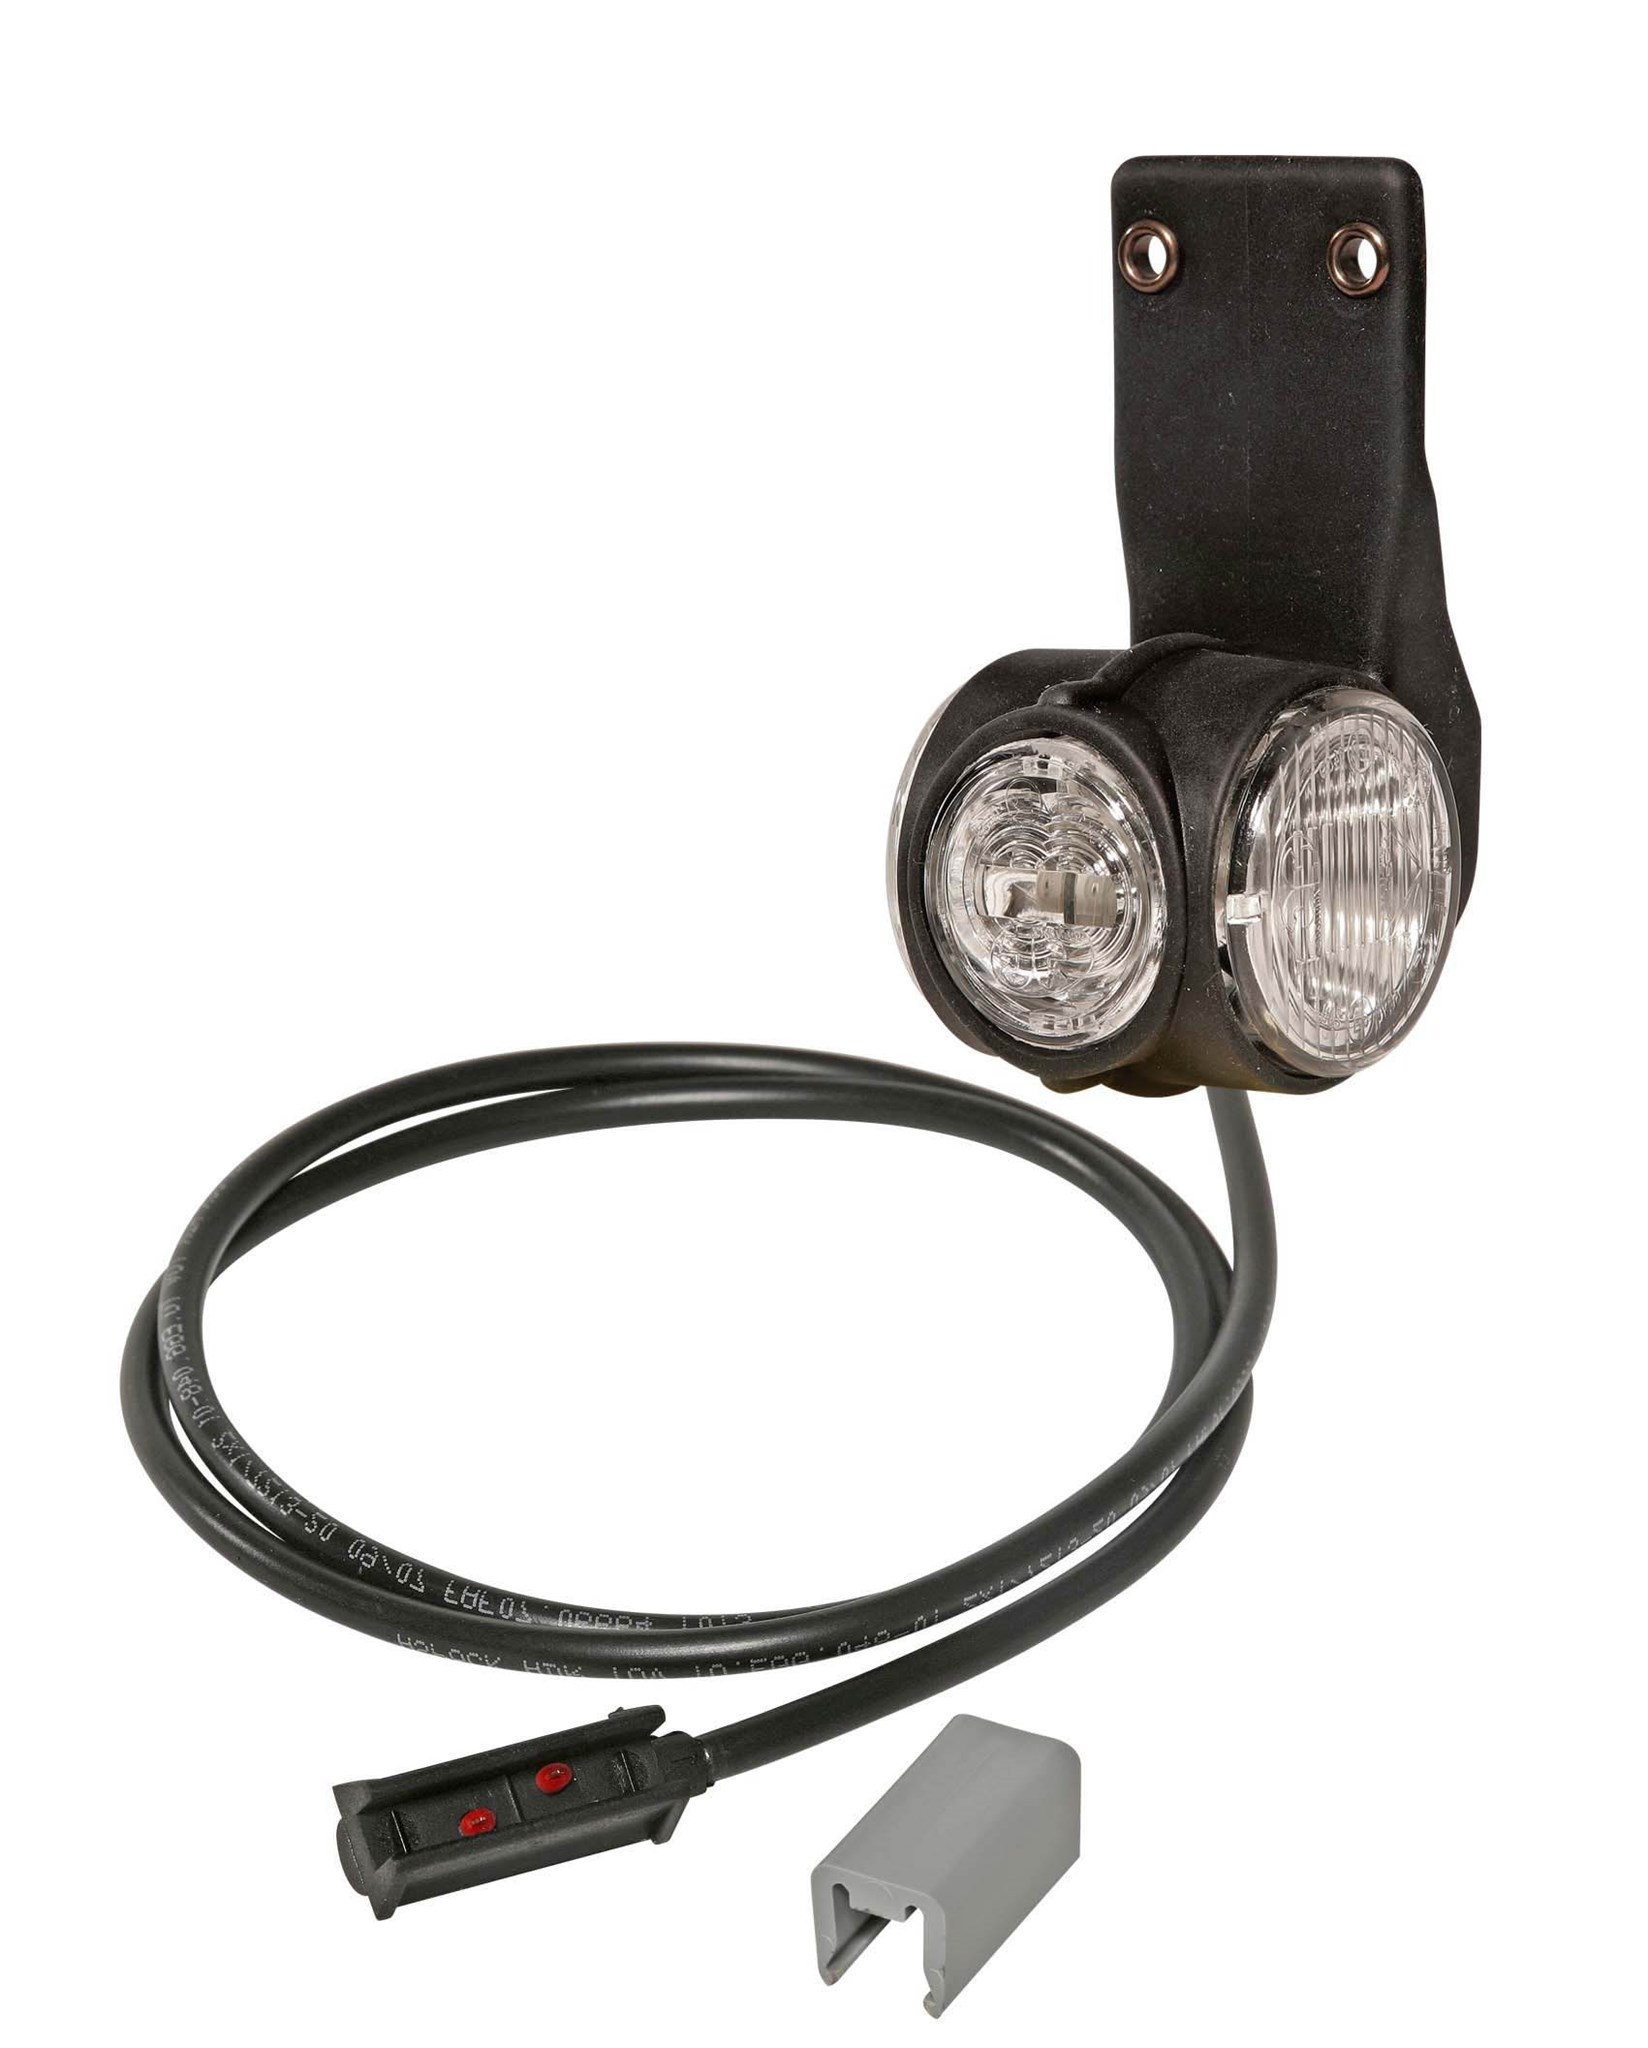 Immagine di 31-3364-024 Aspöck Superpoint III rechts, Pendelhalter P&R 1500mm ro/we/or, LED